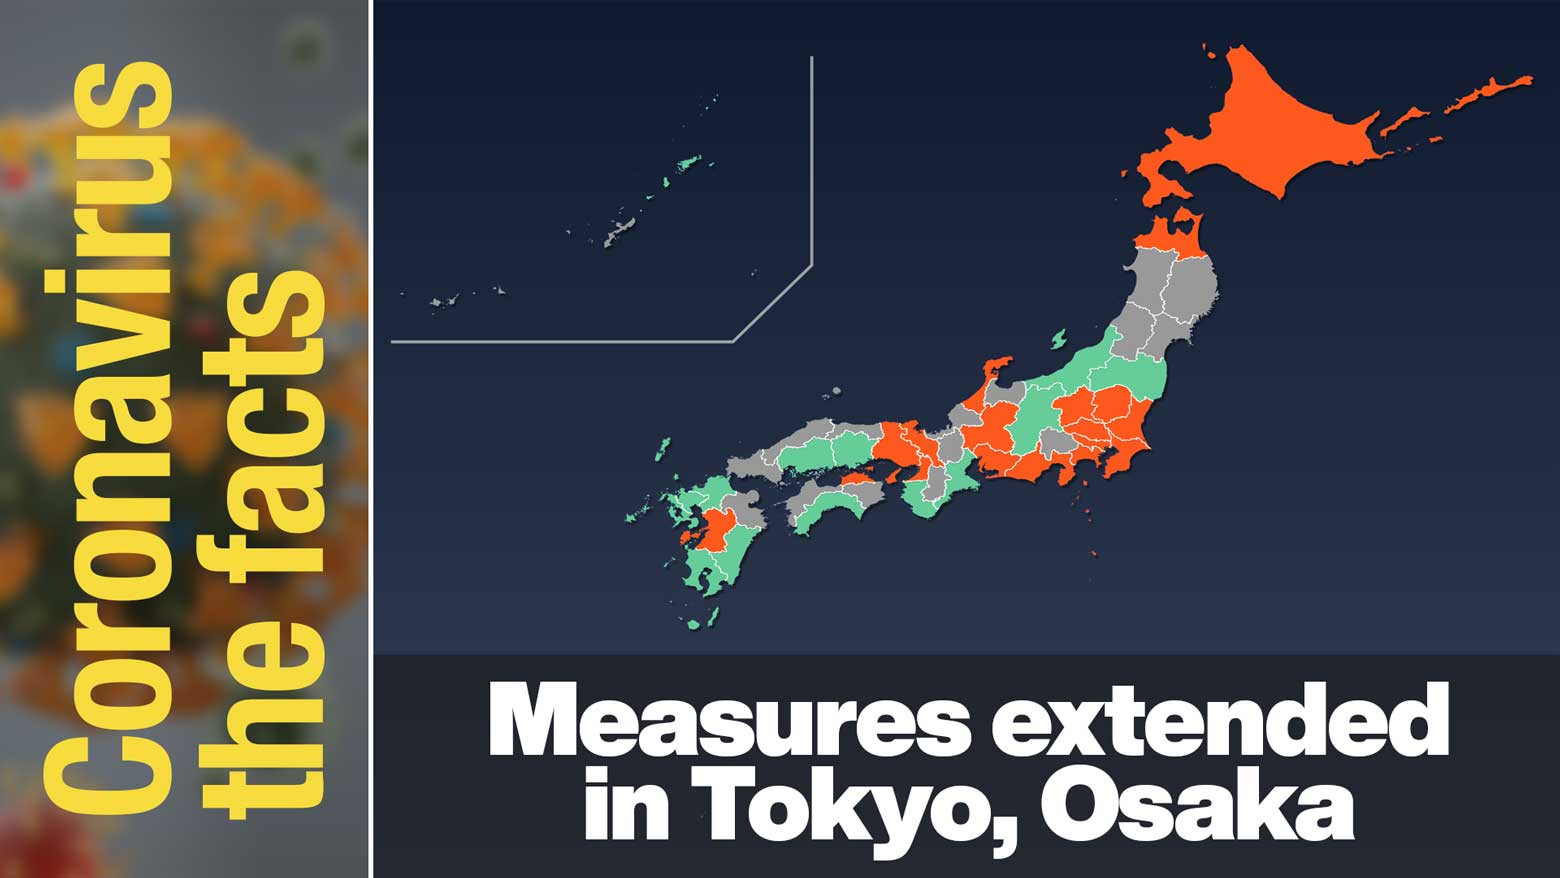 Restrictions extended, mainly in big cities, including Tokyo and Osaka